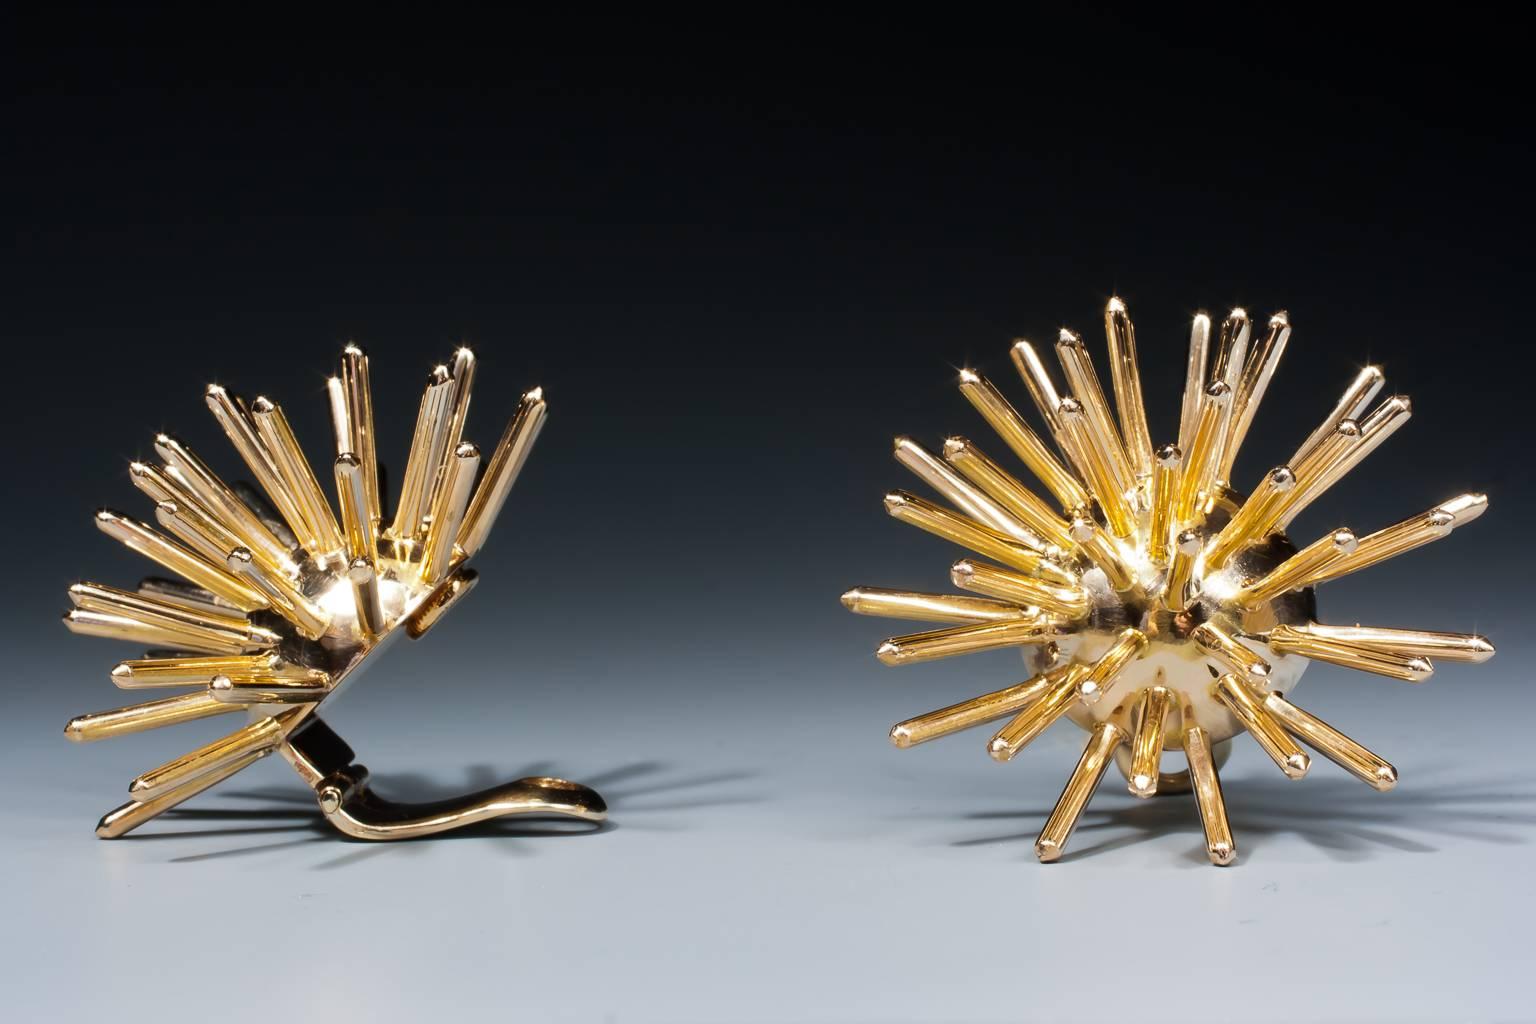 A great pair of sputnik earrings by Cartier, mounted in yellow gold. With clip backs. Signed Cartier and numbered.

Hallmark: 14K stands for 14 karat gold. 

New York, circa 1957-1960.